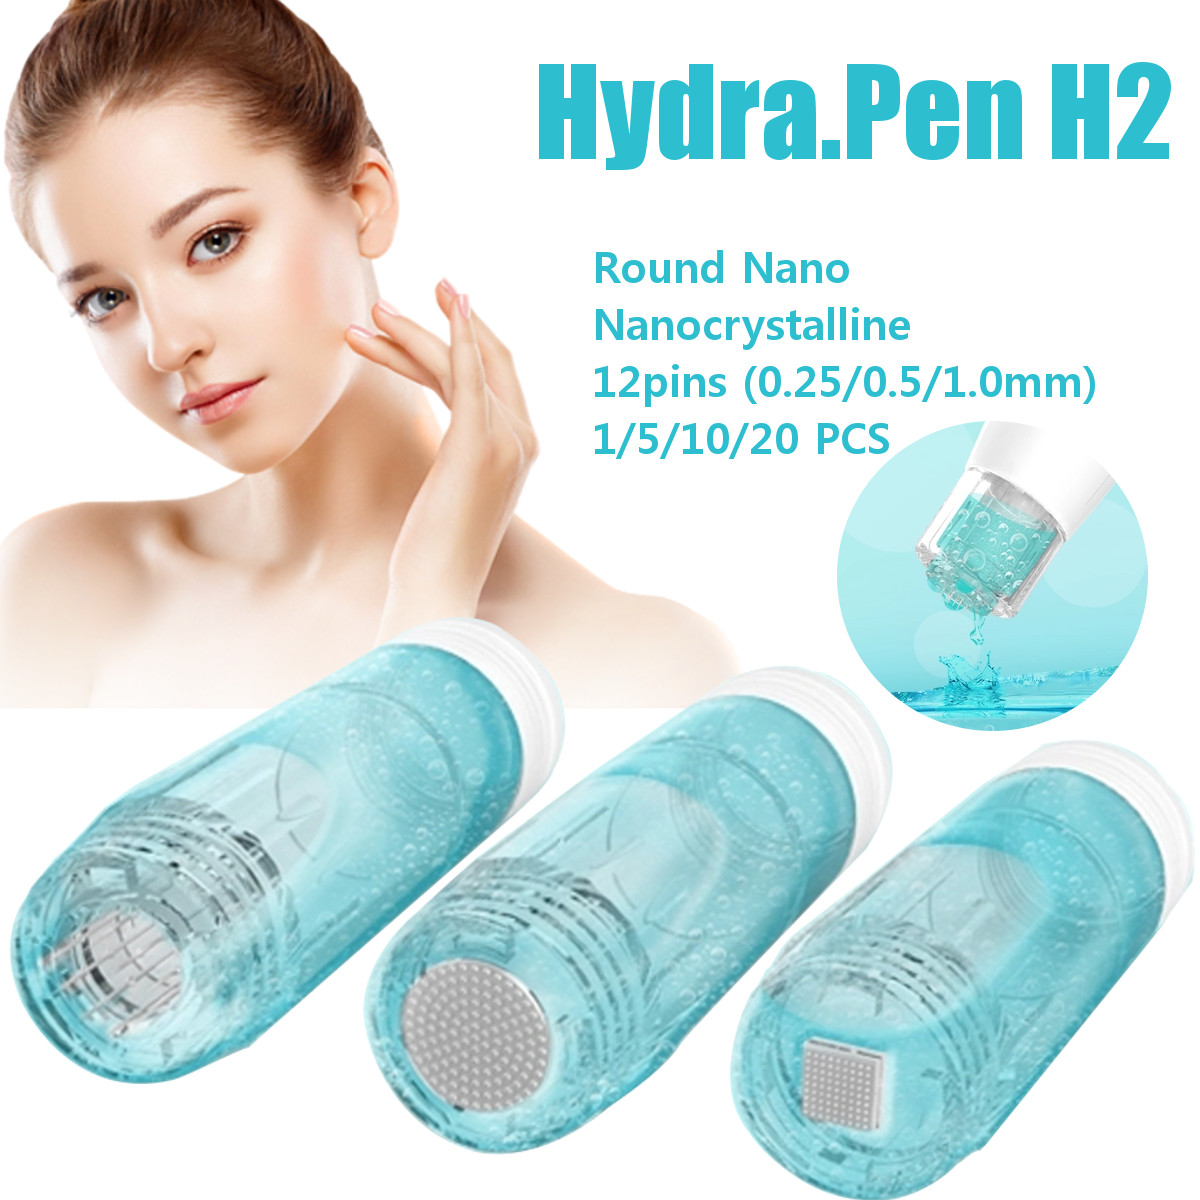 HydraPen-H2-Replacement-Micro-Needle-Cartridges-5-25Pcs-Hydra-Pen-H2-Needle-Cartridges-12-Pins-Needl-1632580-2